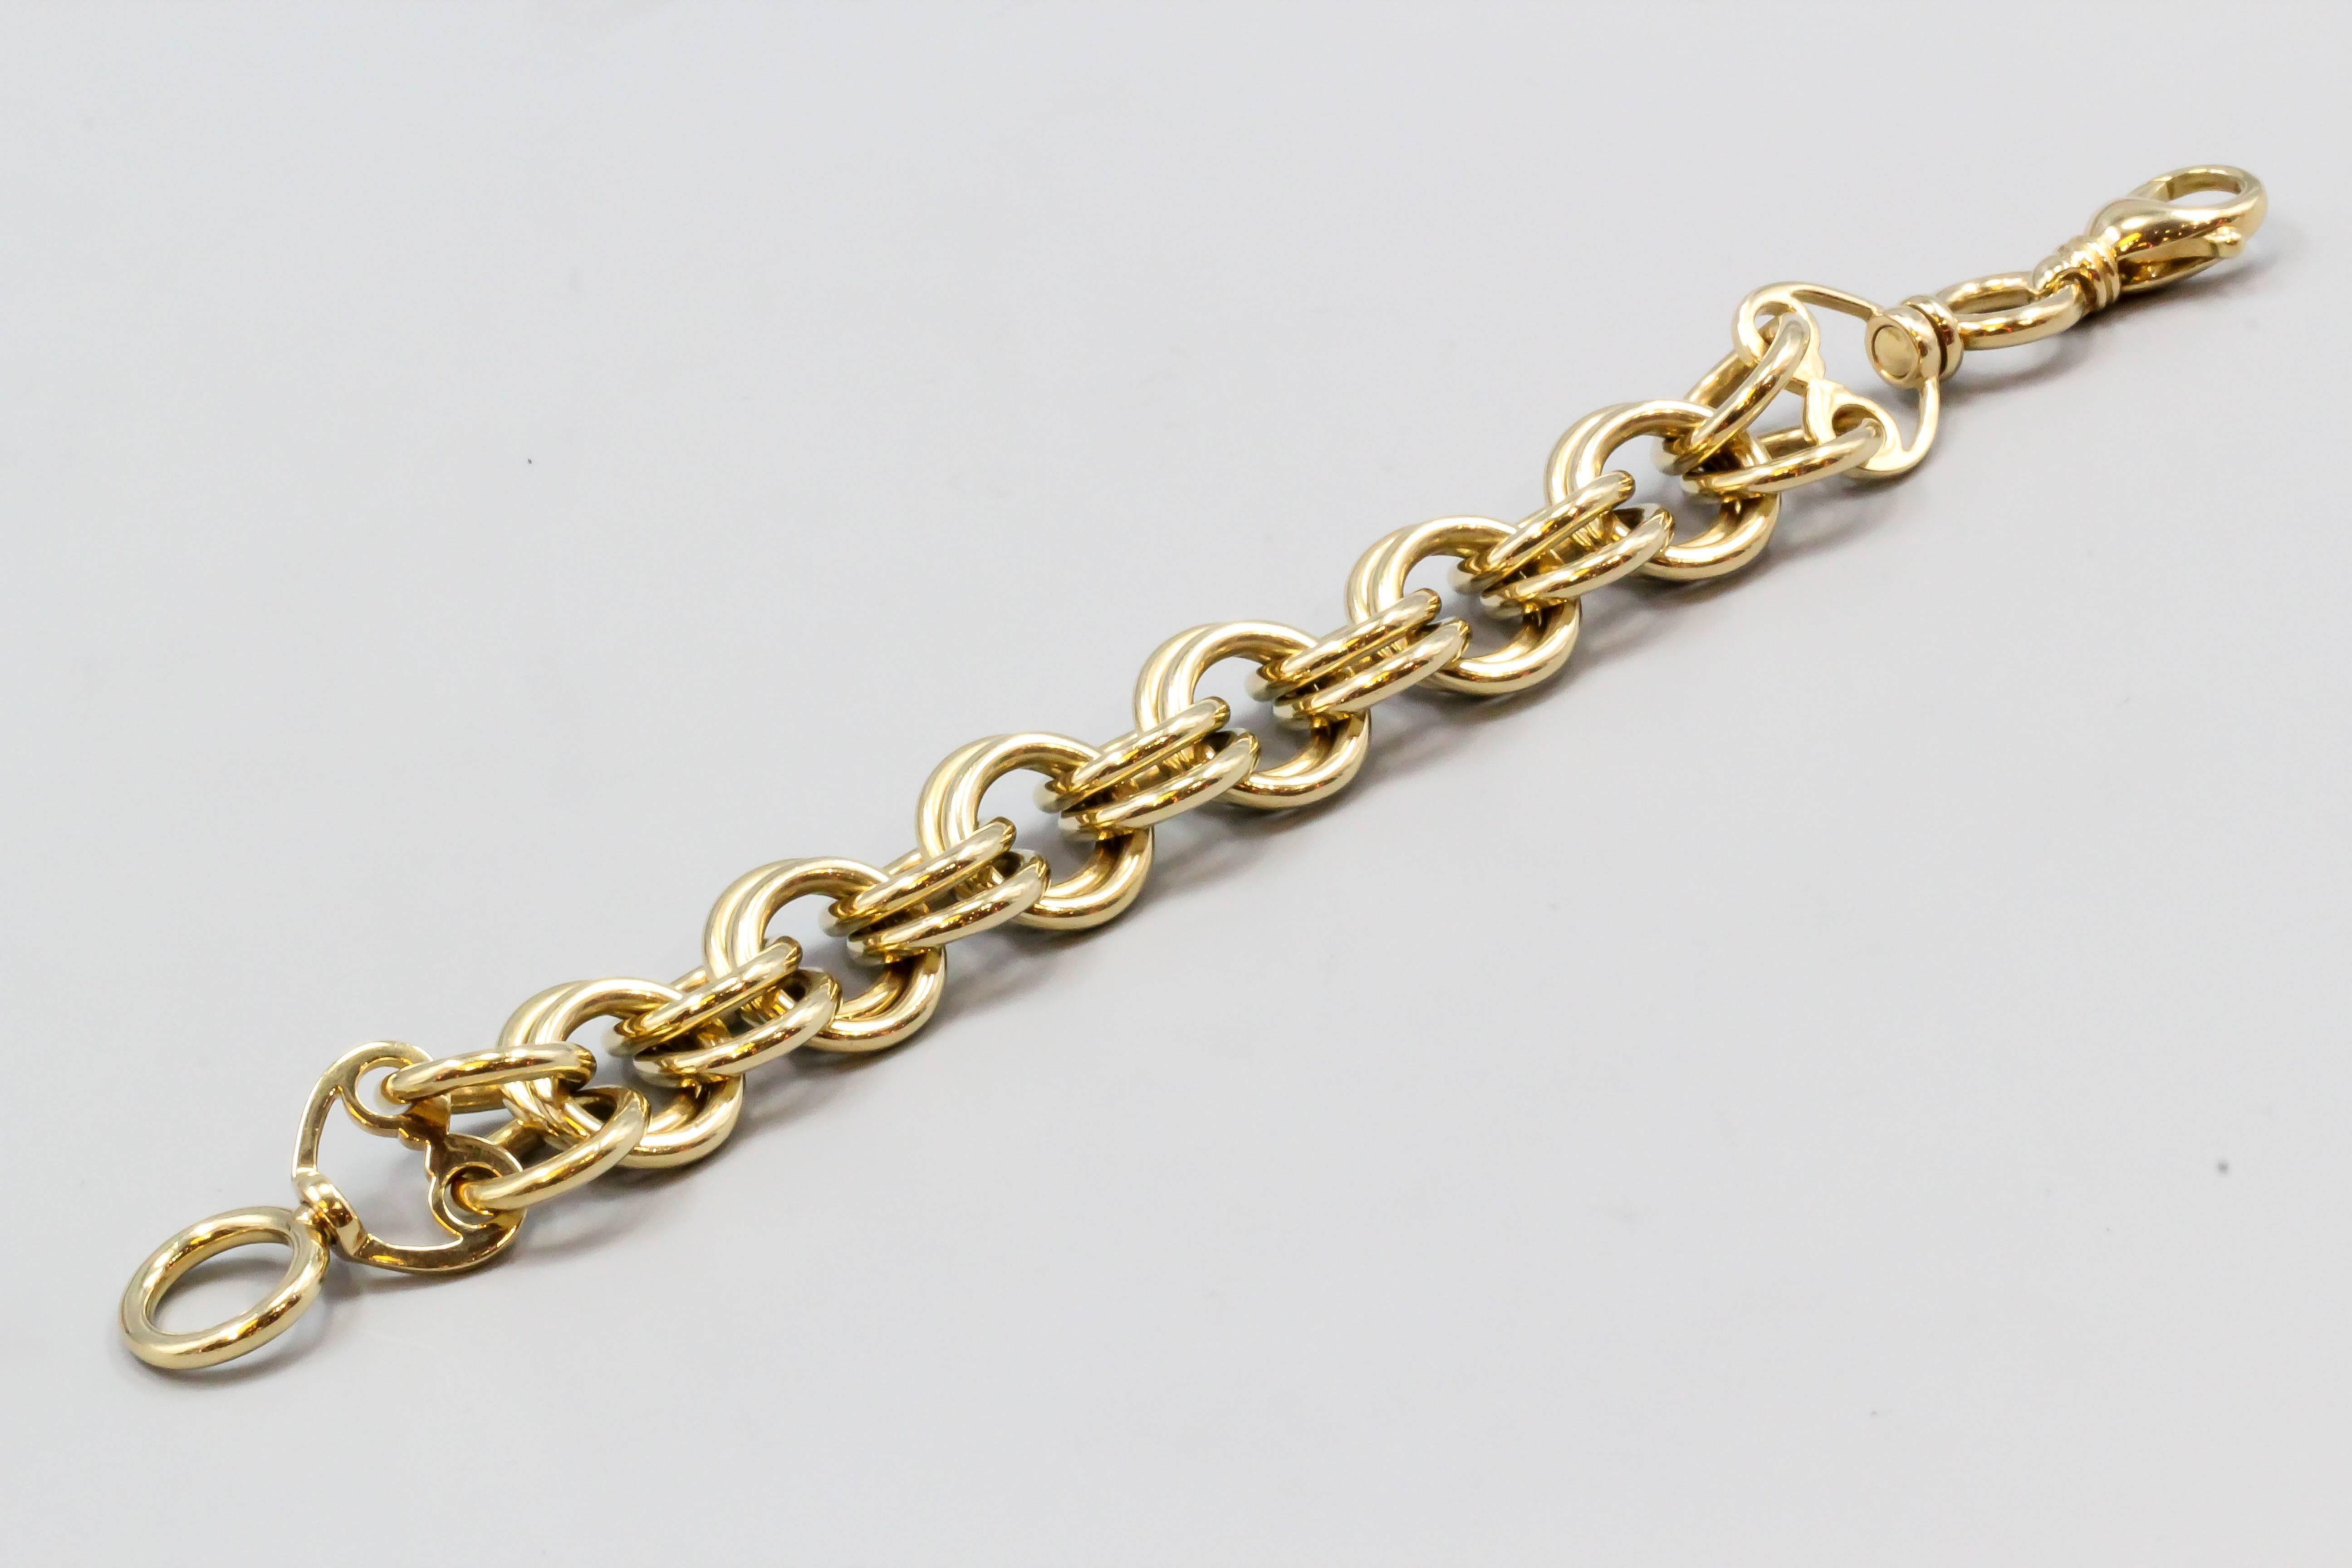 Elegant 18K yellow gold link bracelet by Tiffany & Co. Schlumberger.  It features doubled up hoops linked together with a large lobster claw clasp. Perfect for adding various larger charms and very versatile. Beautiful workmanship. Retail price